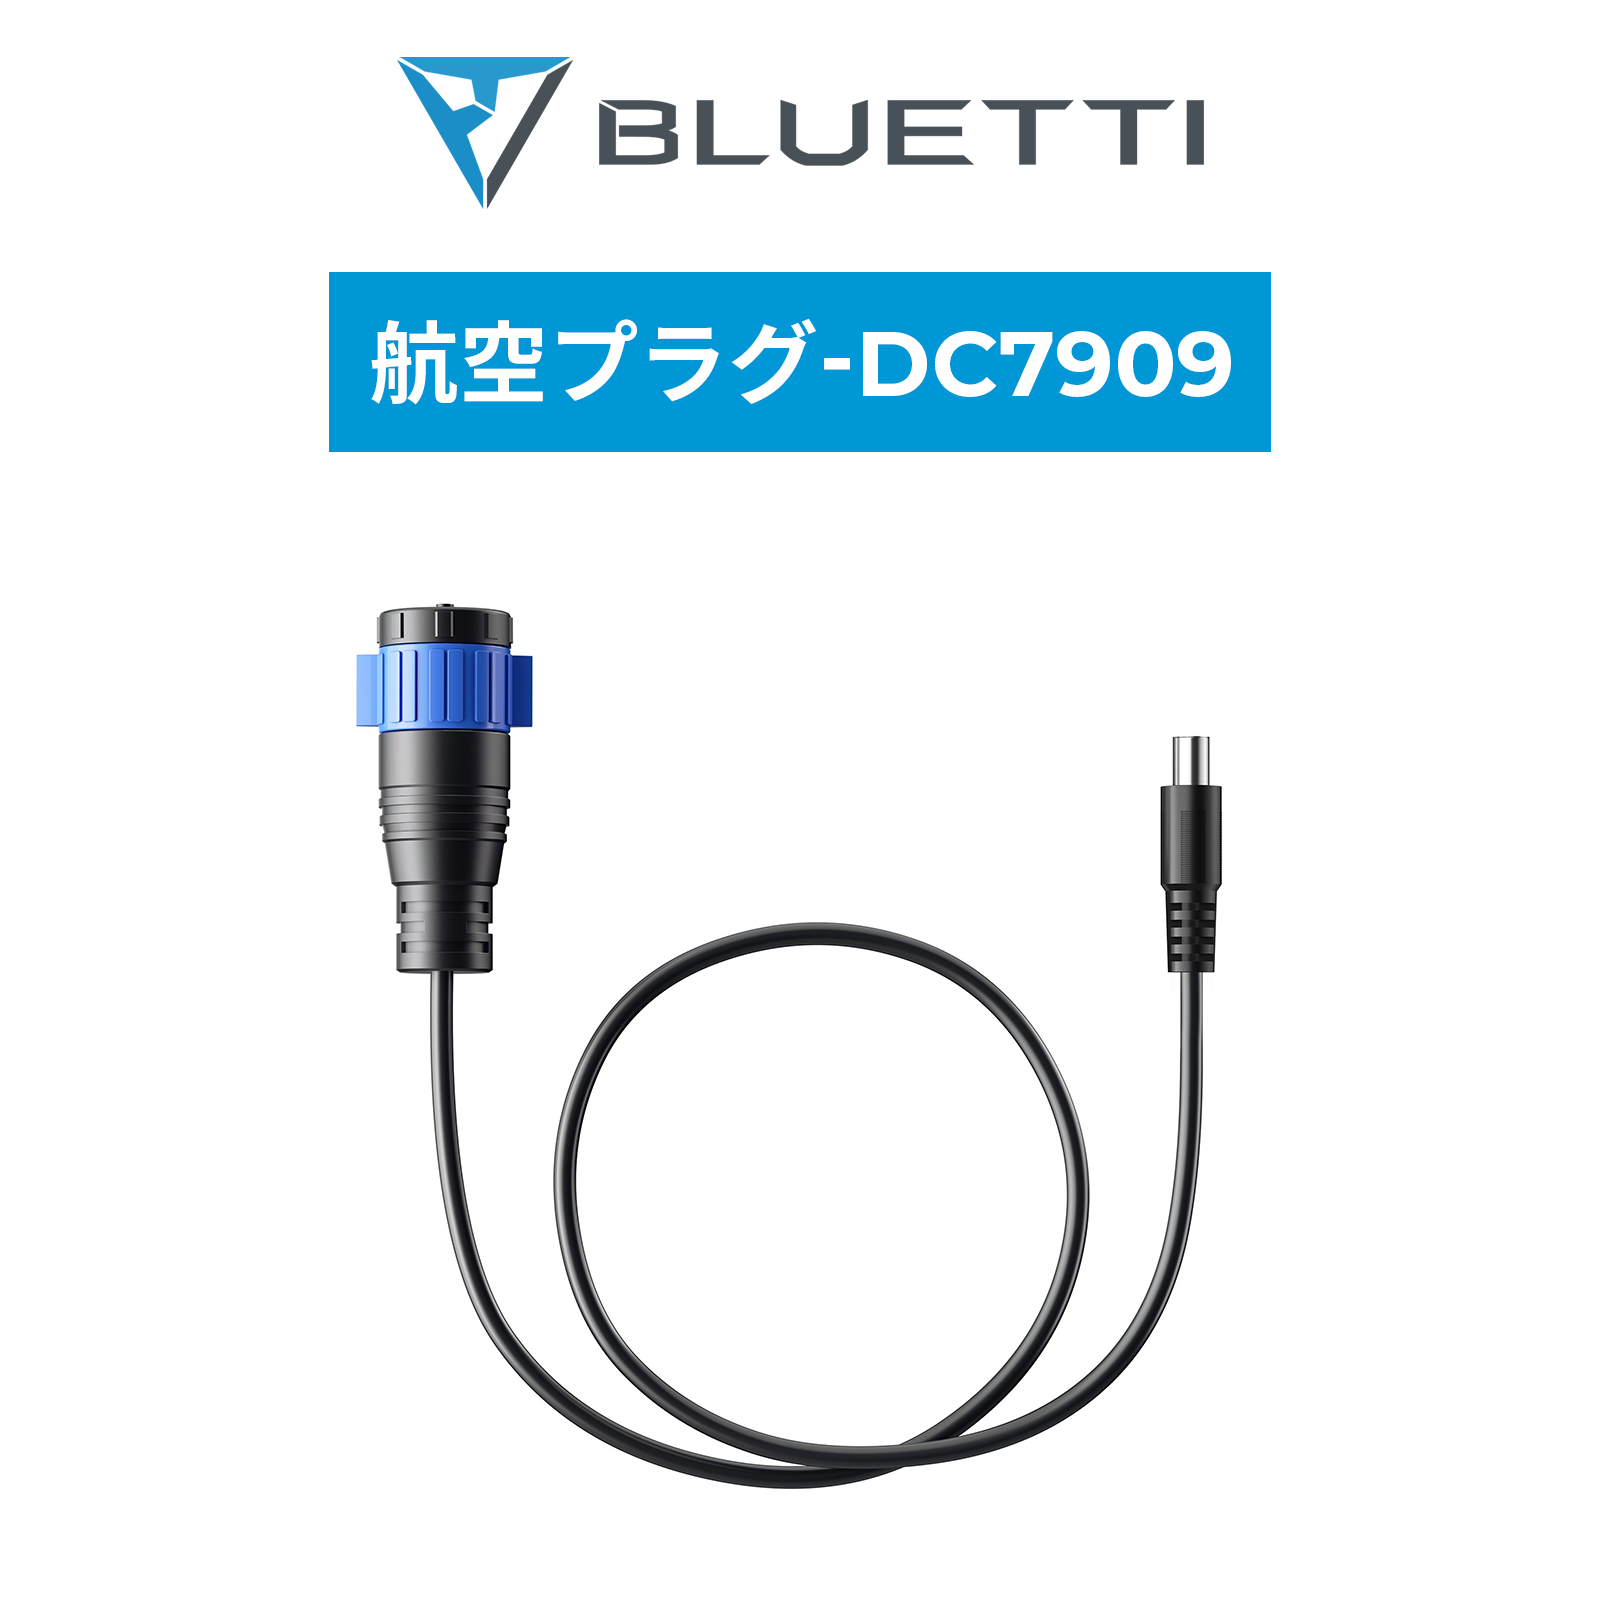 BLUETTI portable power supply B80 for P120D from DC7909 conversion cable connector adaptor B80.AC180 / EB3A / EB70S. connection for cable free shipping 